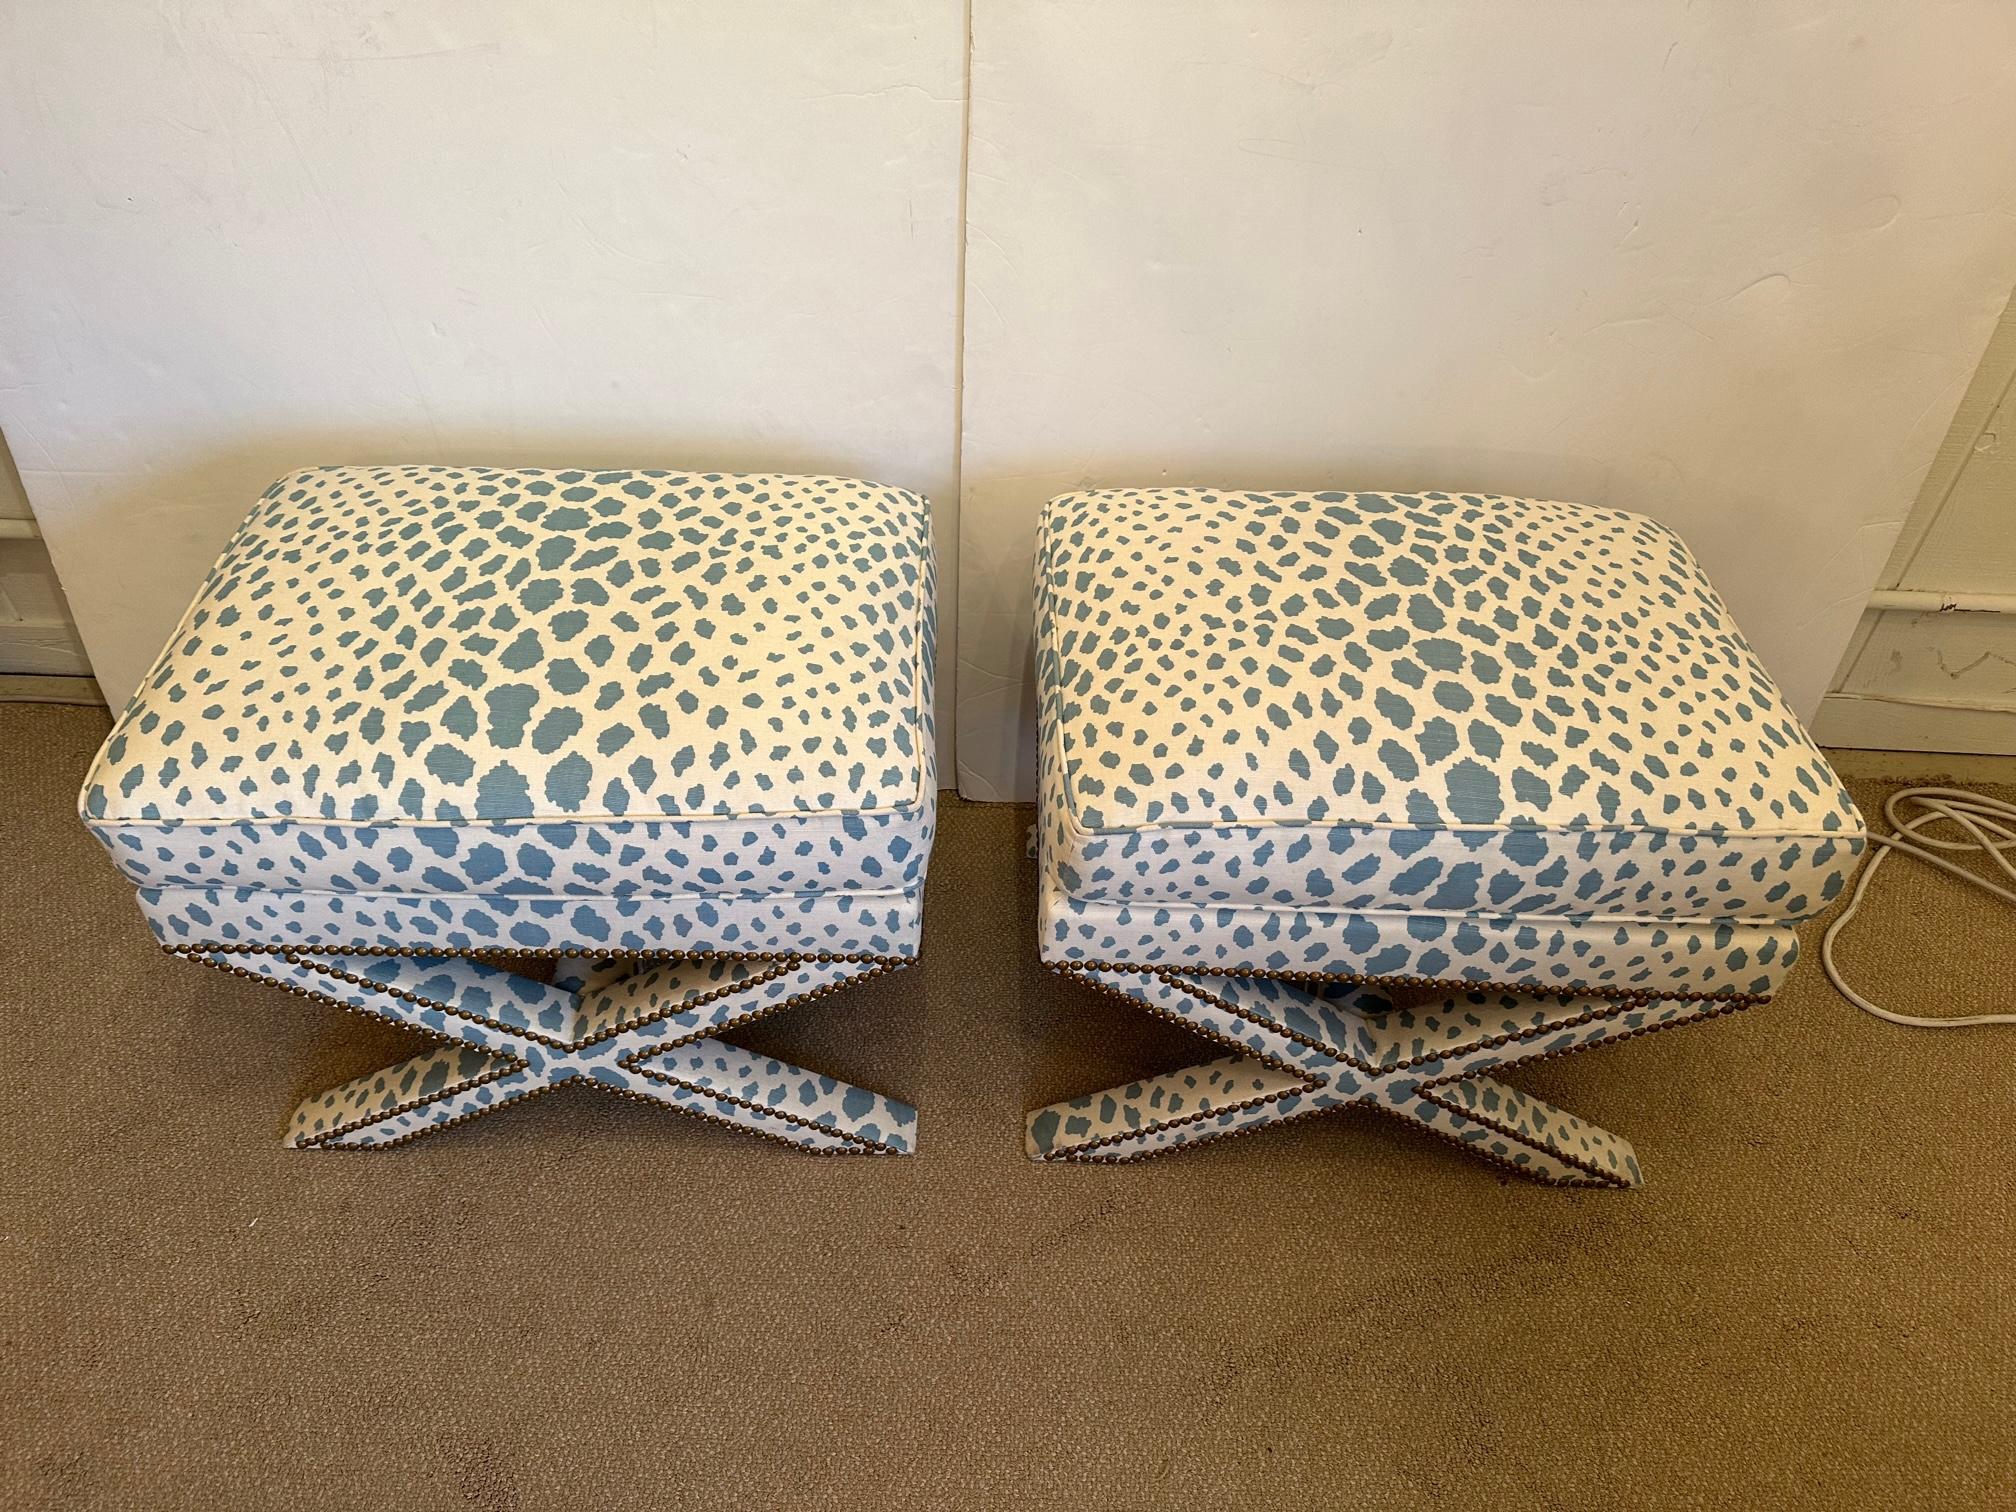 Super stylish iconic Billy Baldwin upholstered benches having classic X shaped stretchers. Newly updated with smashing Quadrille grey blue and white faux leopard fabric with brass nailheads.